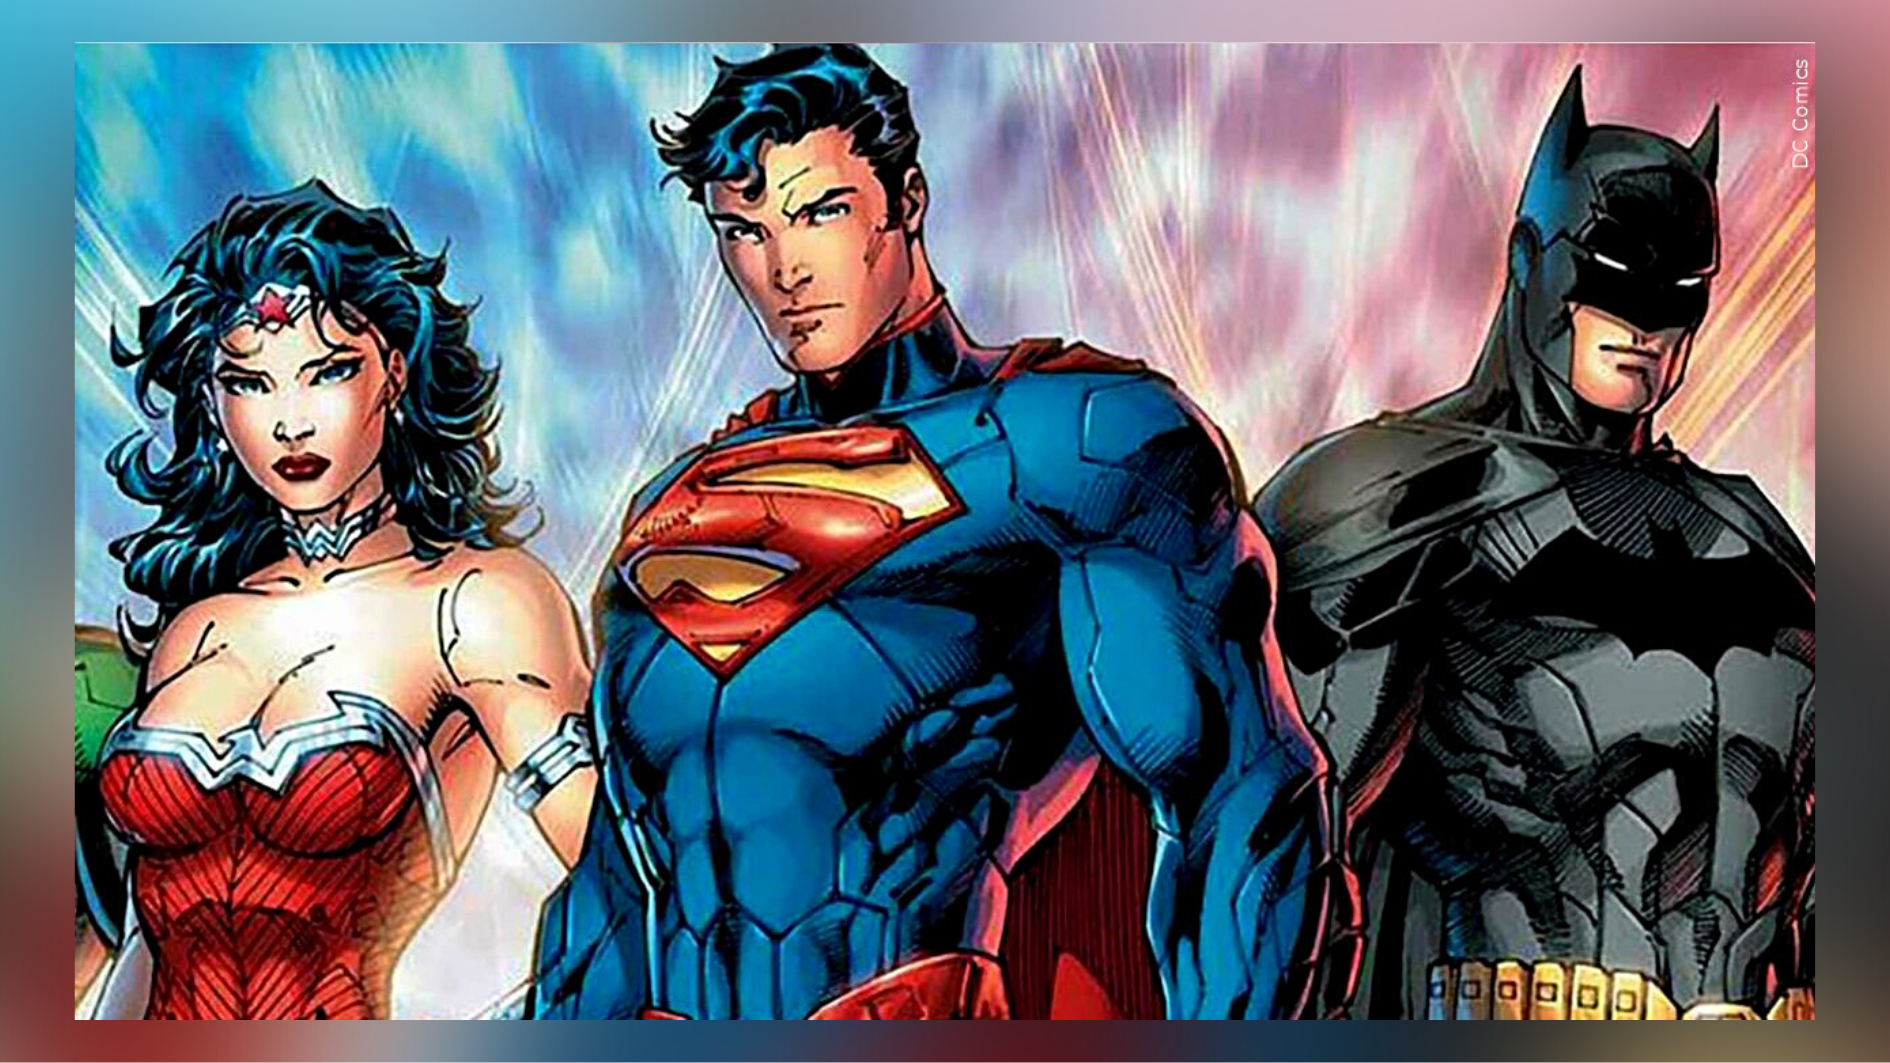 DC officially announces 'Superman: Legacy' in 2025, Wonder Woman prequel  and Batman films